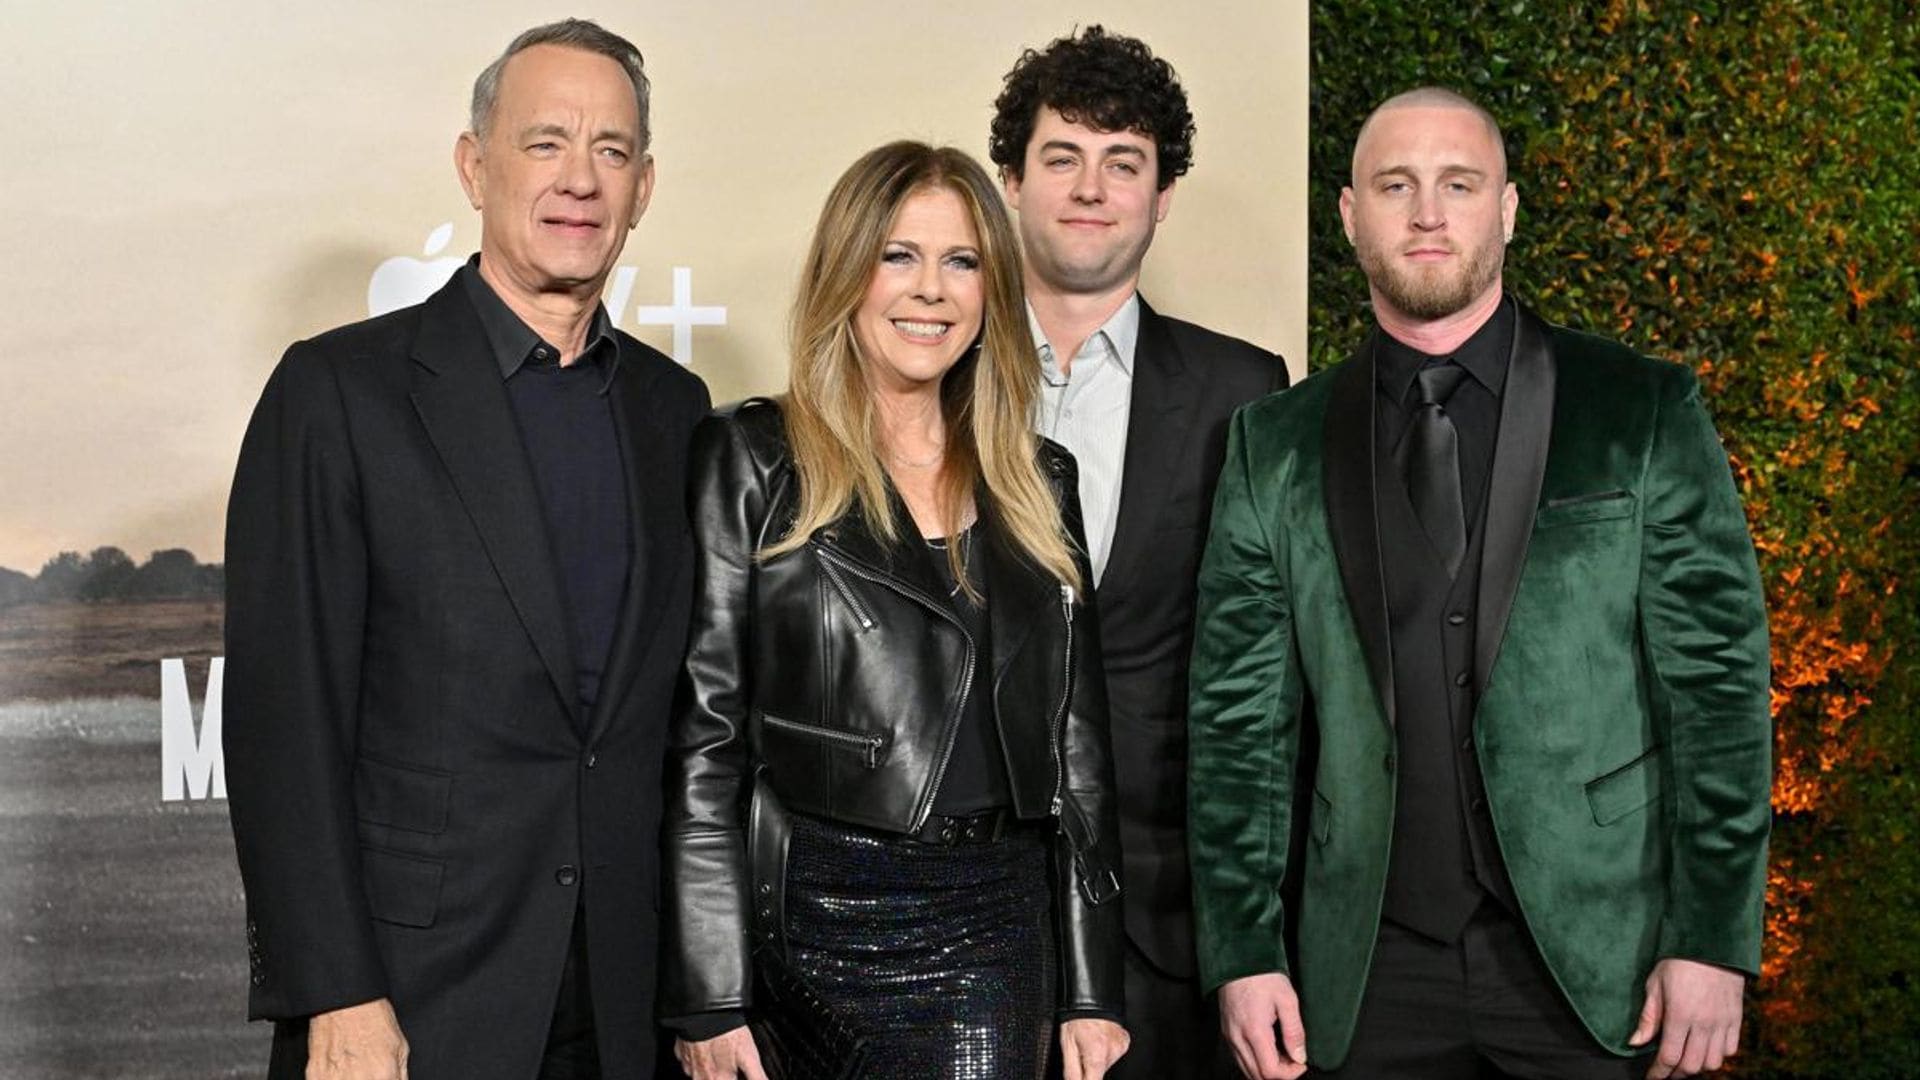 Tom Hanks’ rare red carpet moment with Rita Wilson and sons Chet and Truman